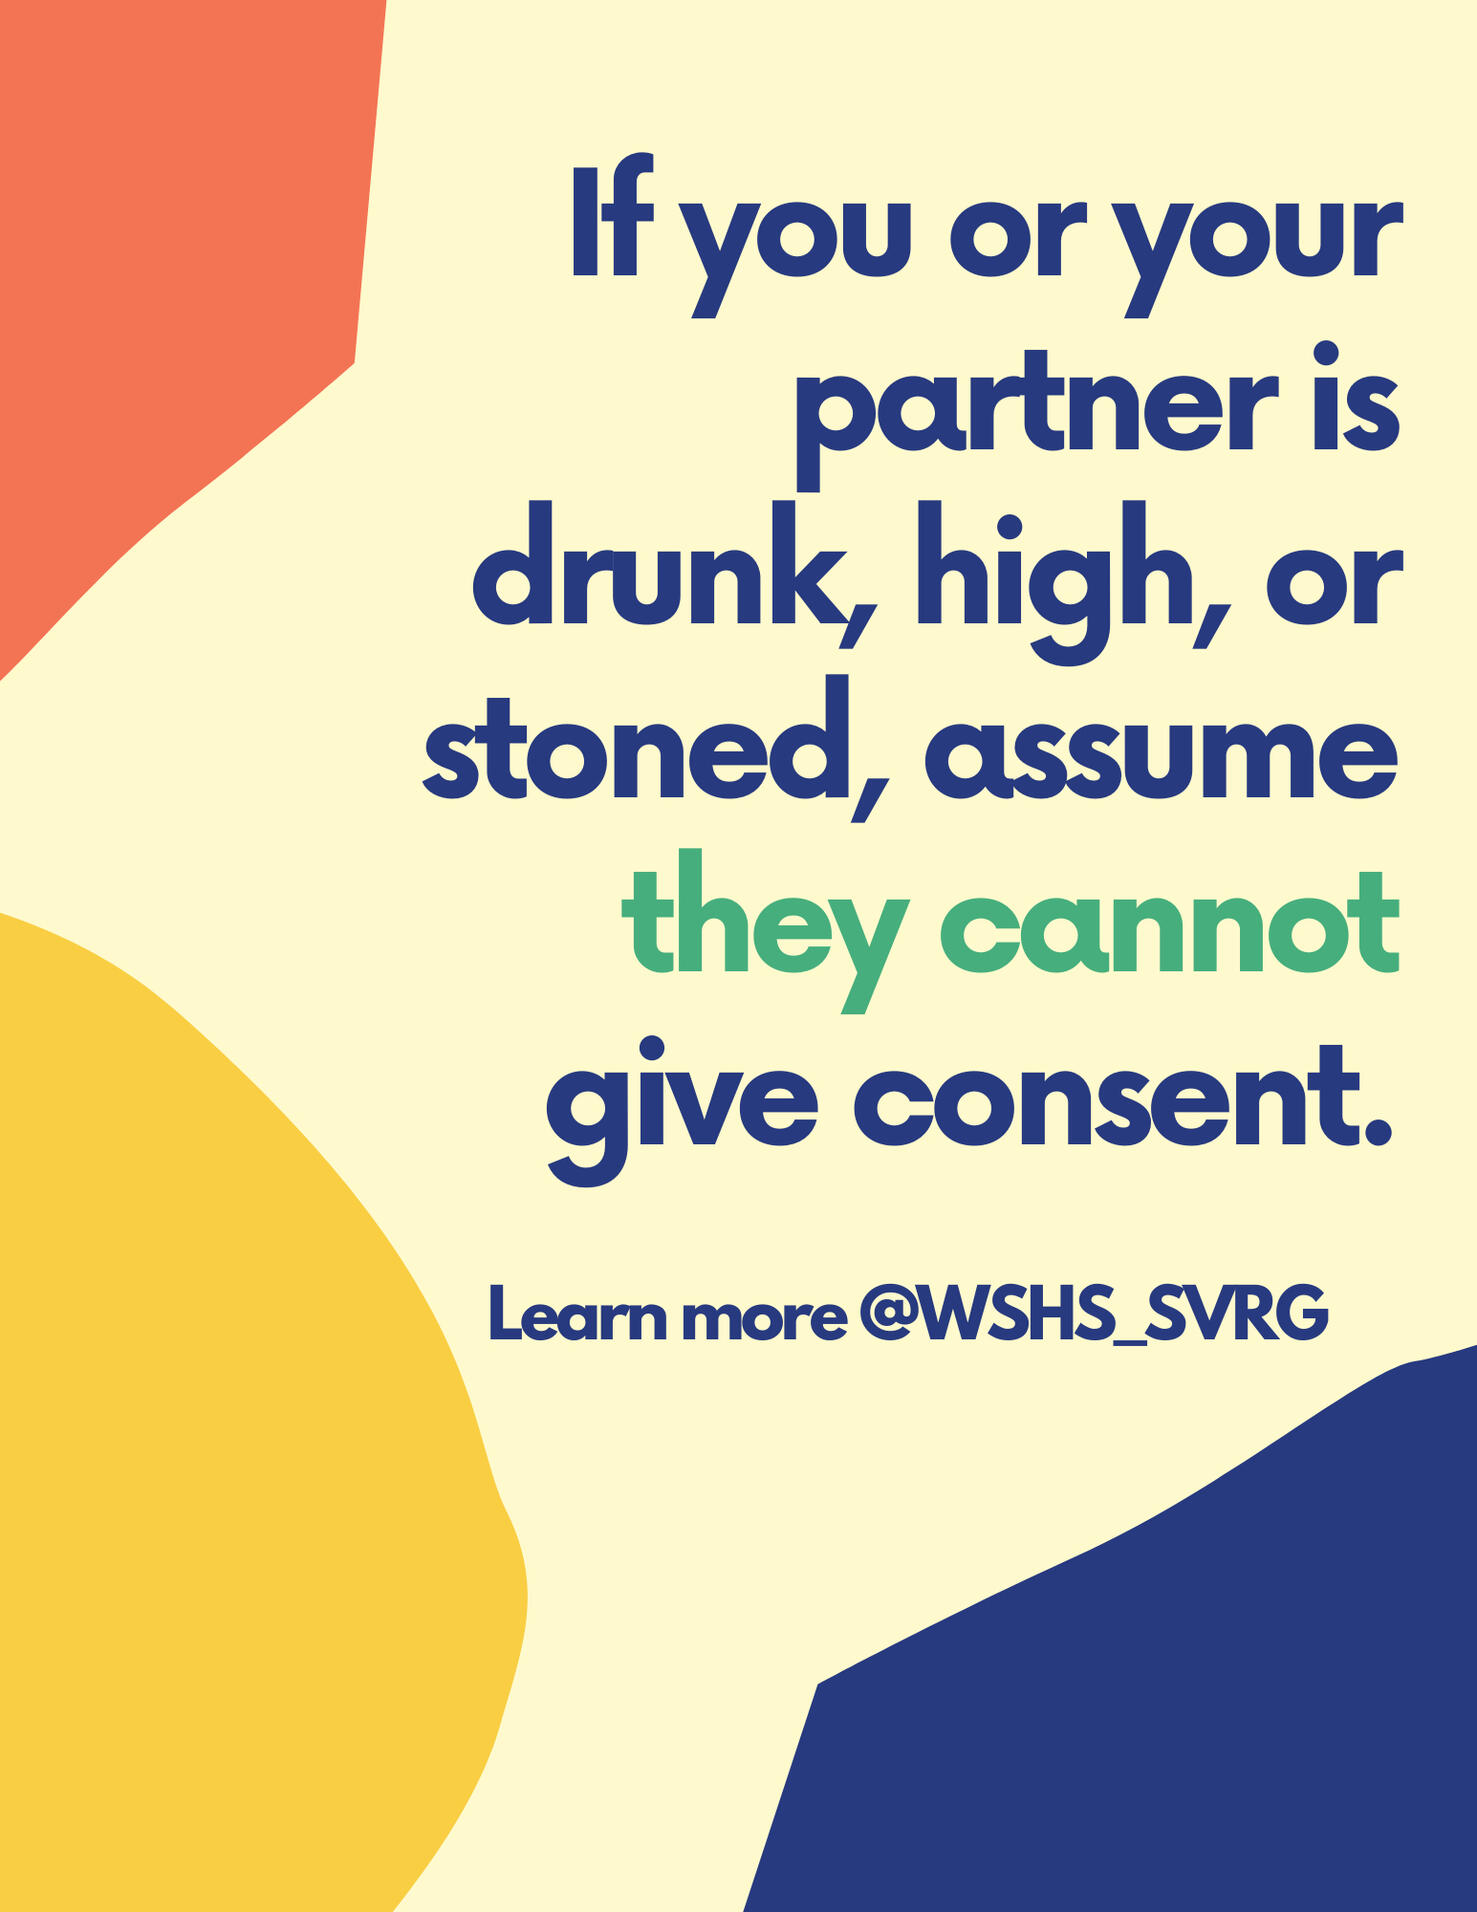 WSHS SVRG "If you or you are partner is drunk, high, or stoned, assume they cannot give consent."